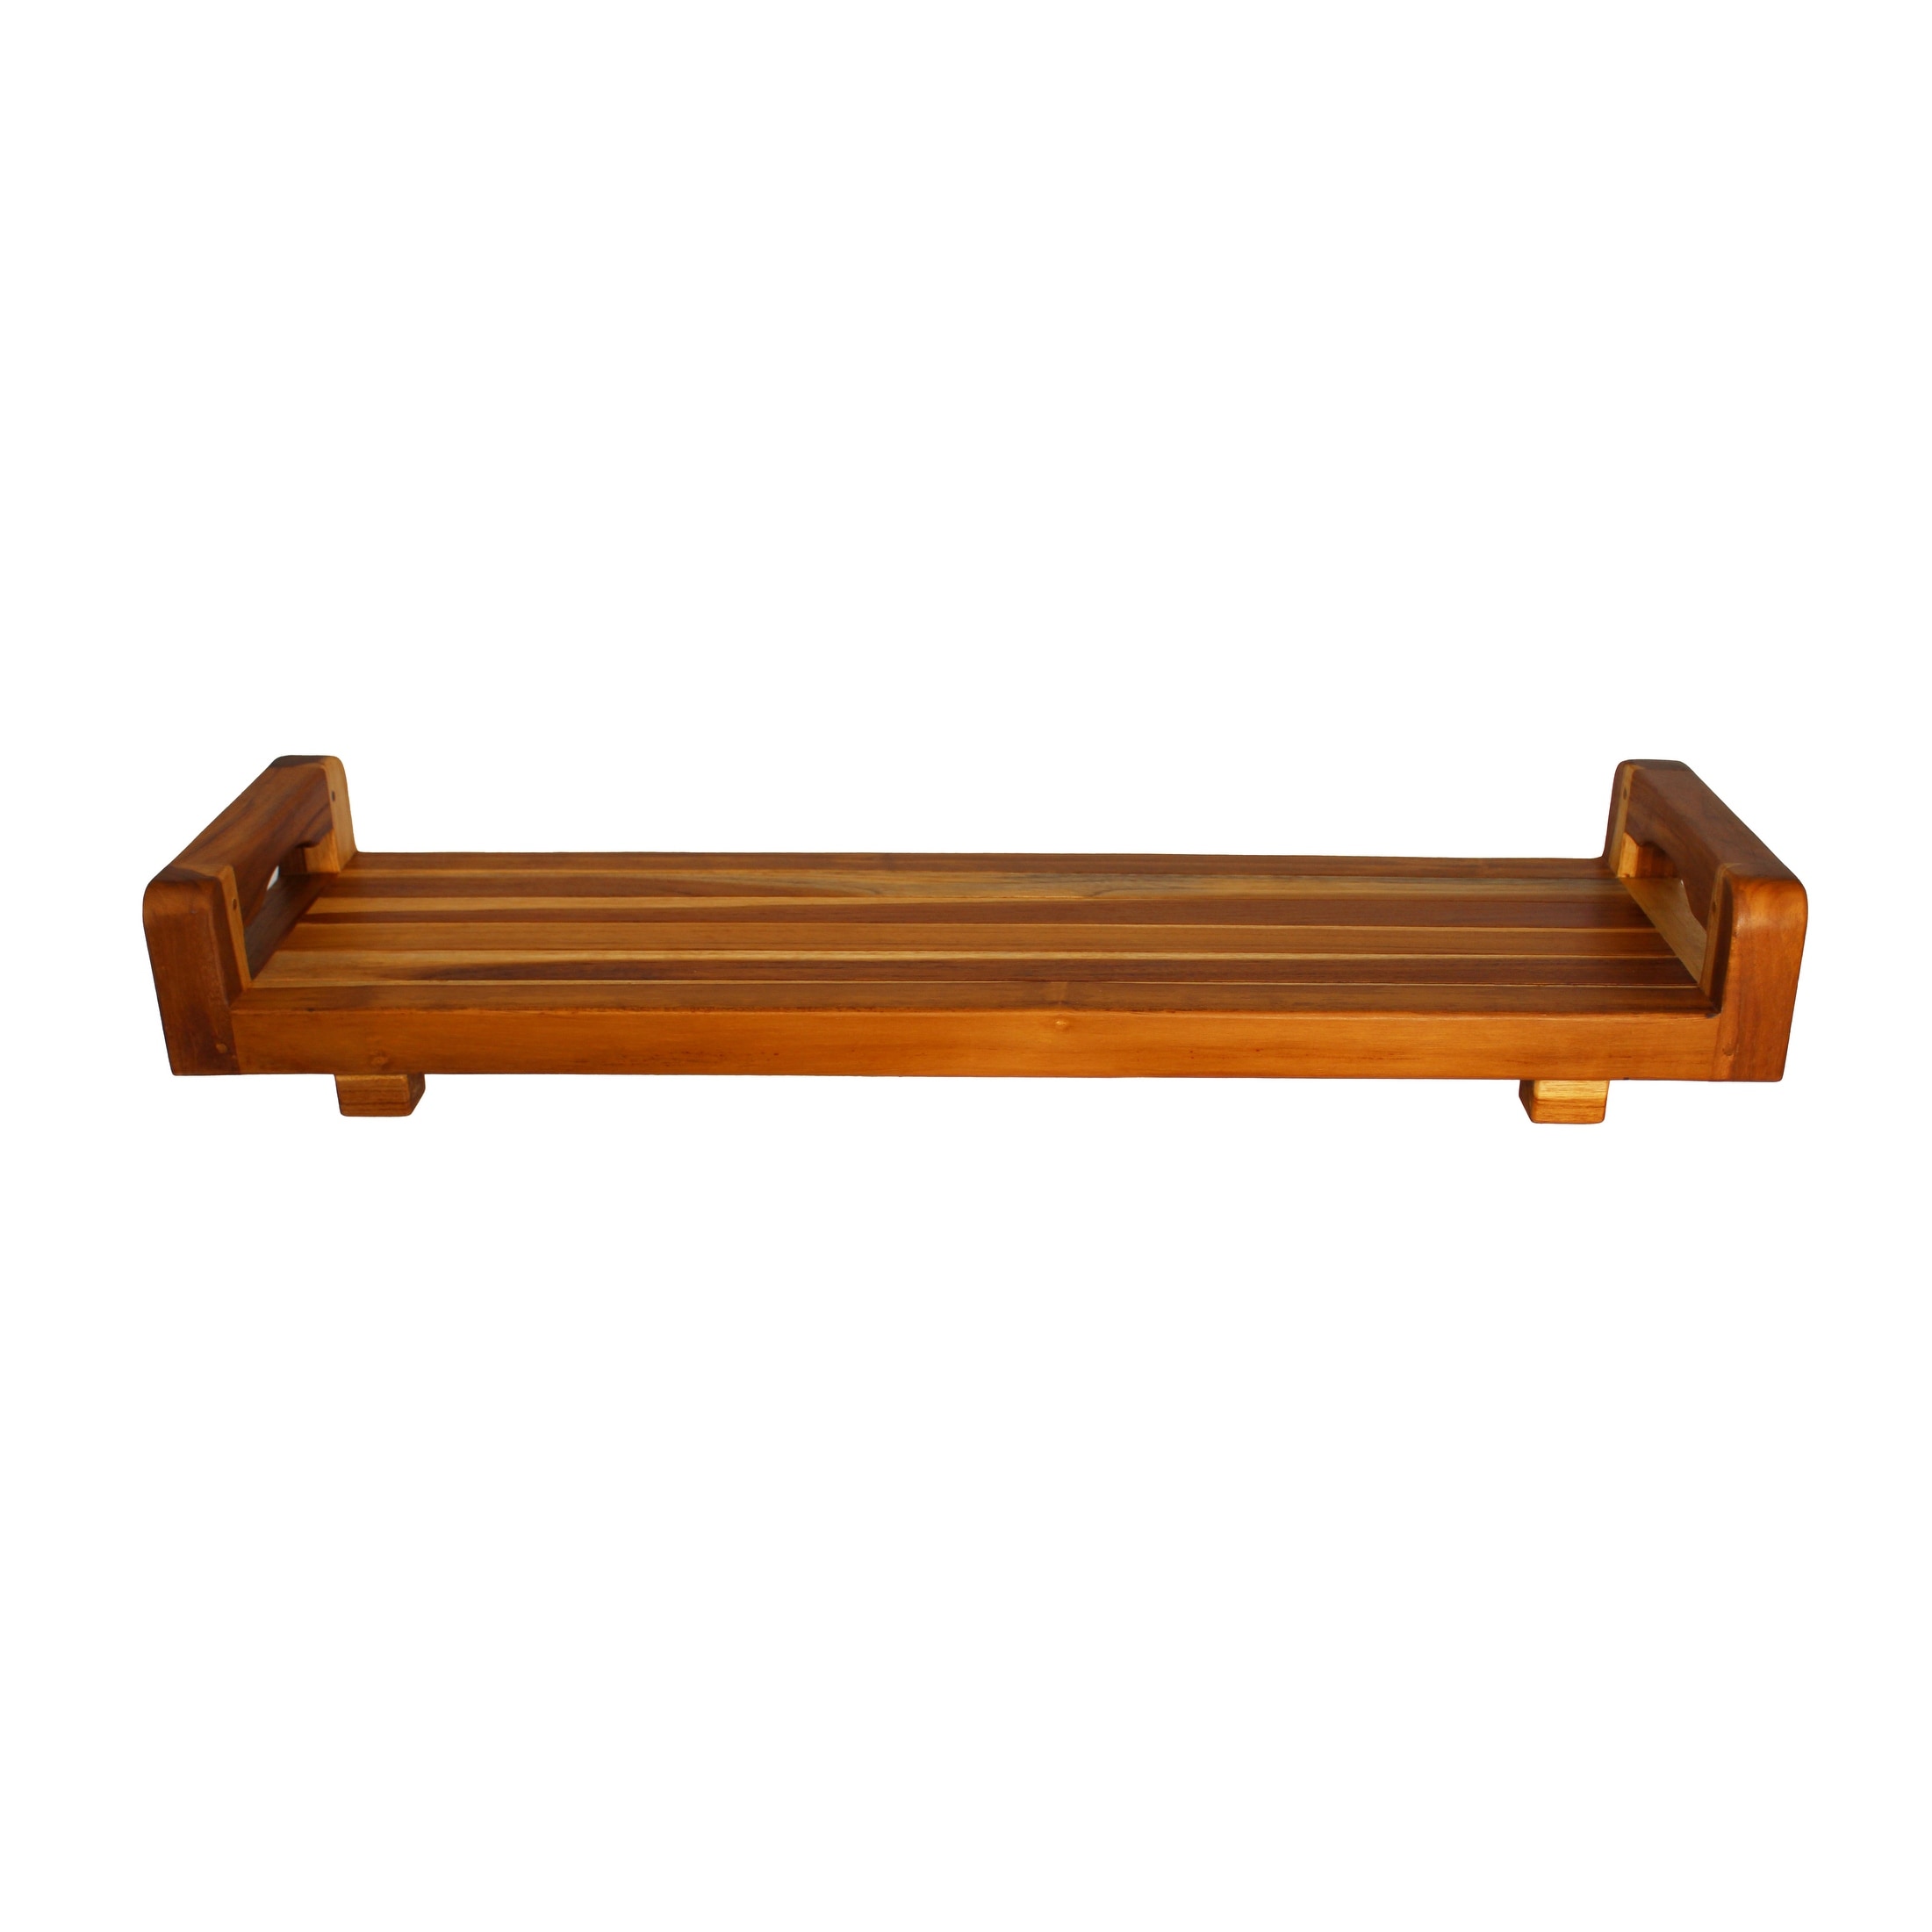 https://ak1.ostkcdn.com/images/products/is/images/direct/38f6f90cd0040002df6a312a93e42afbebdc6e0d/Eleganto%C2%AE-34%22-Teak-Bath-Tray-with-LiftAide%C2%AE-in-EarthyTeak%C2%AE-Finish.jpg